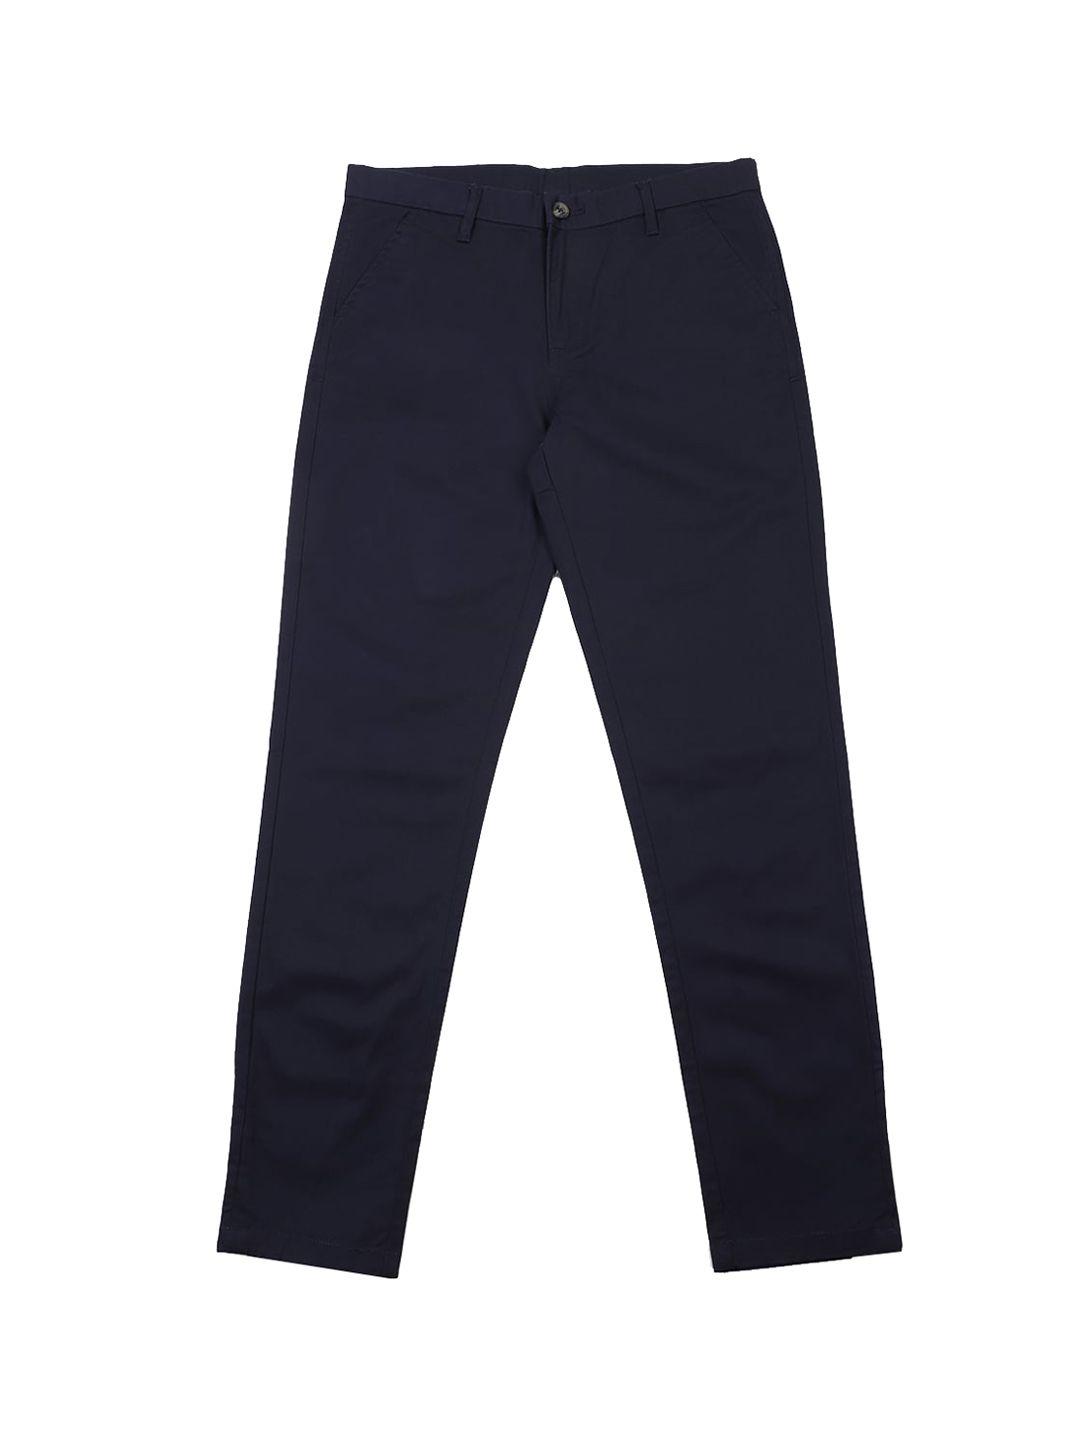 peter england boys chinos pure cotton trousers